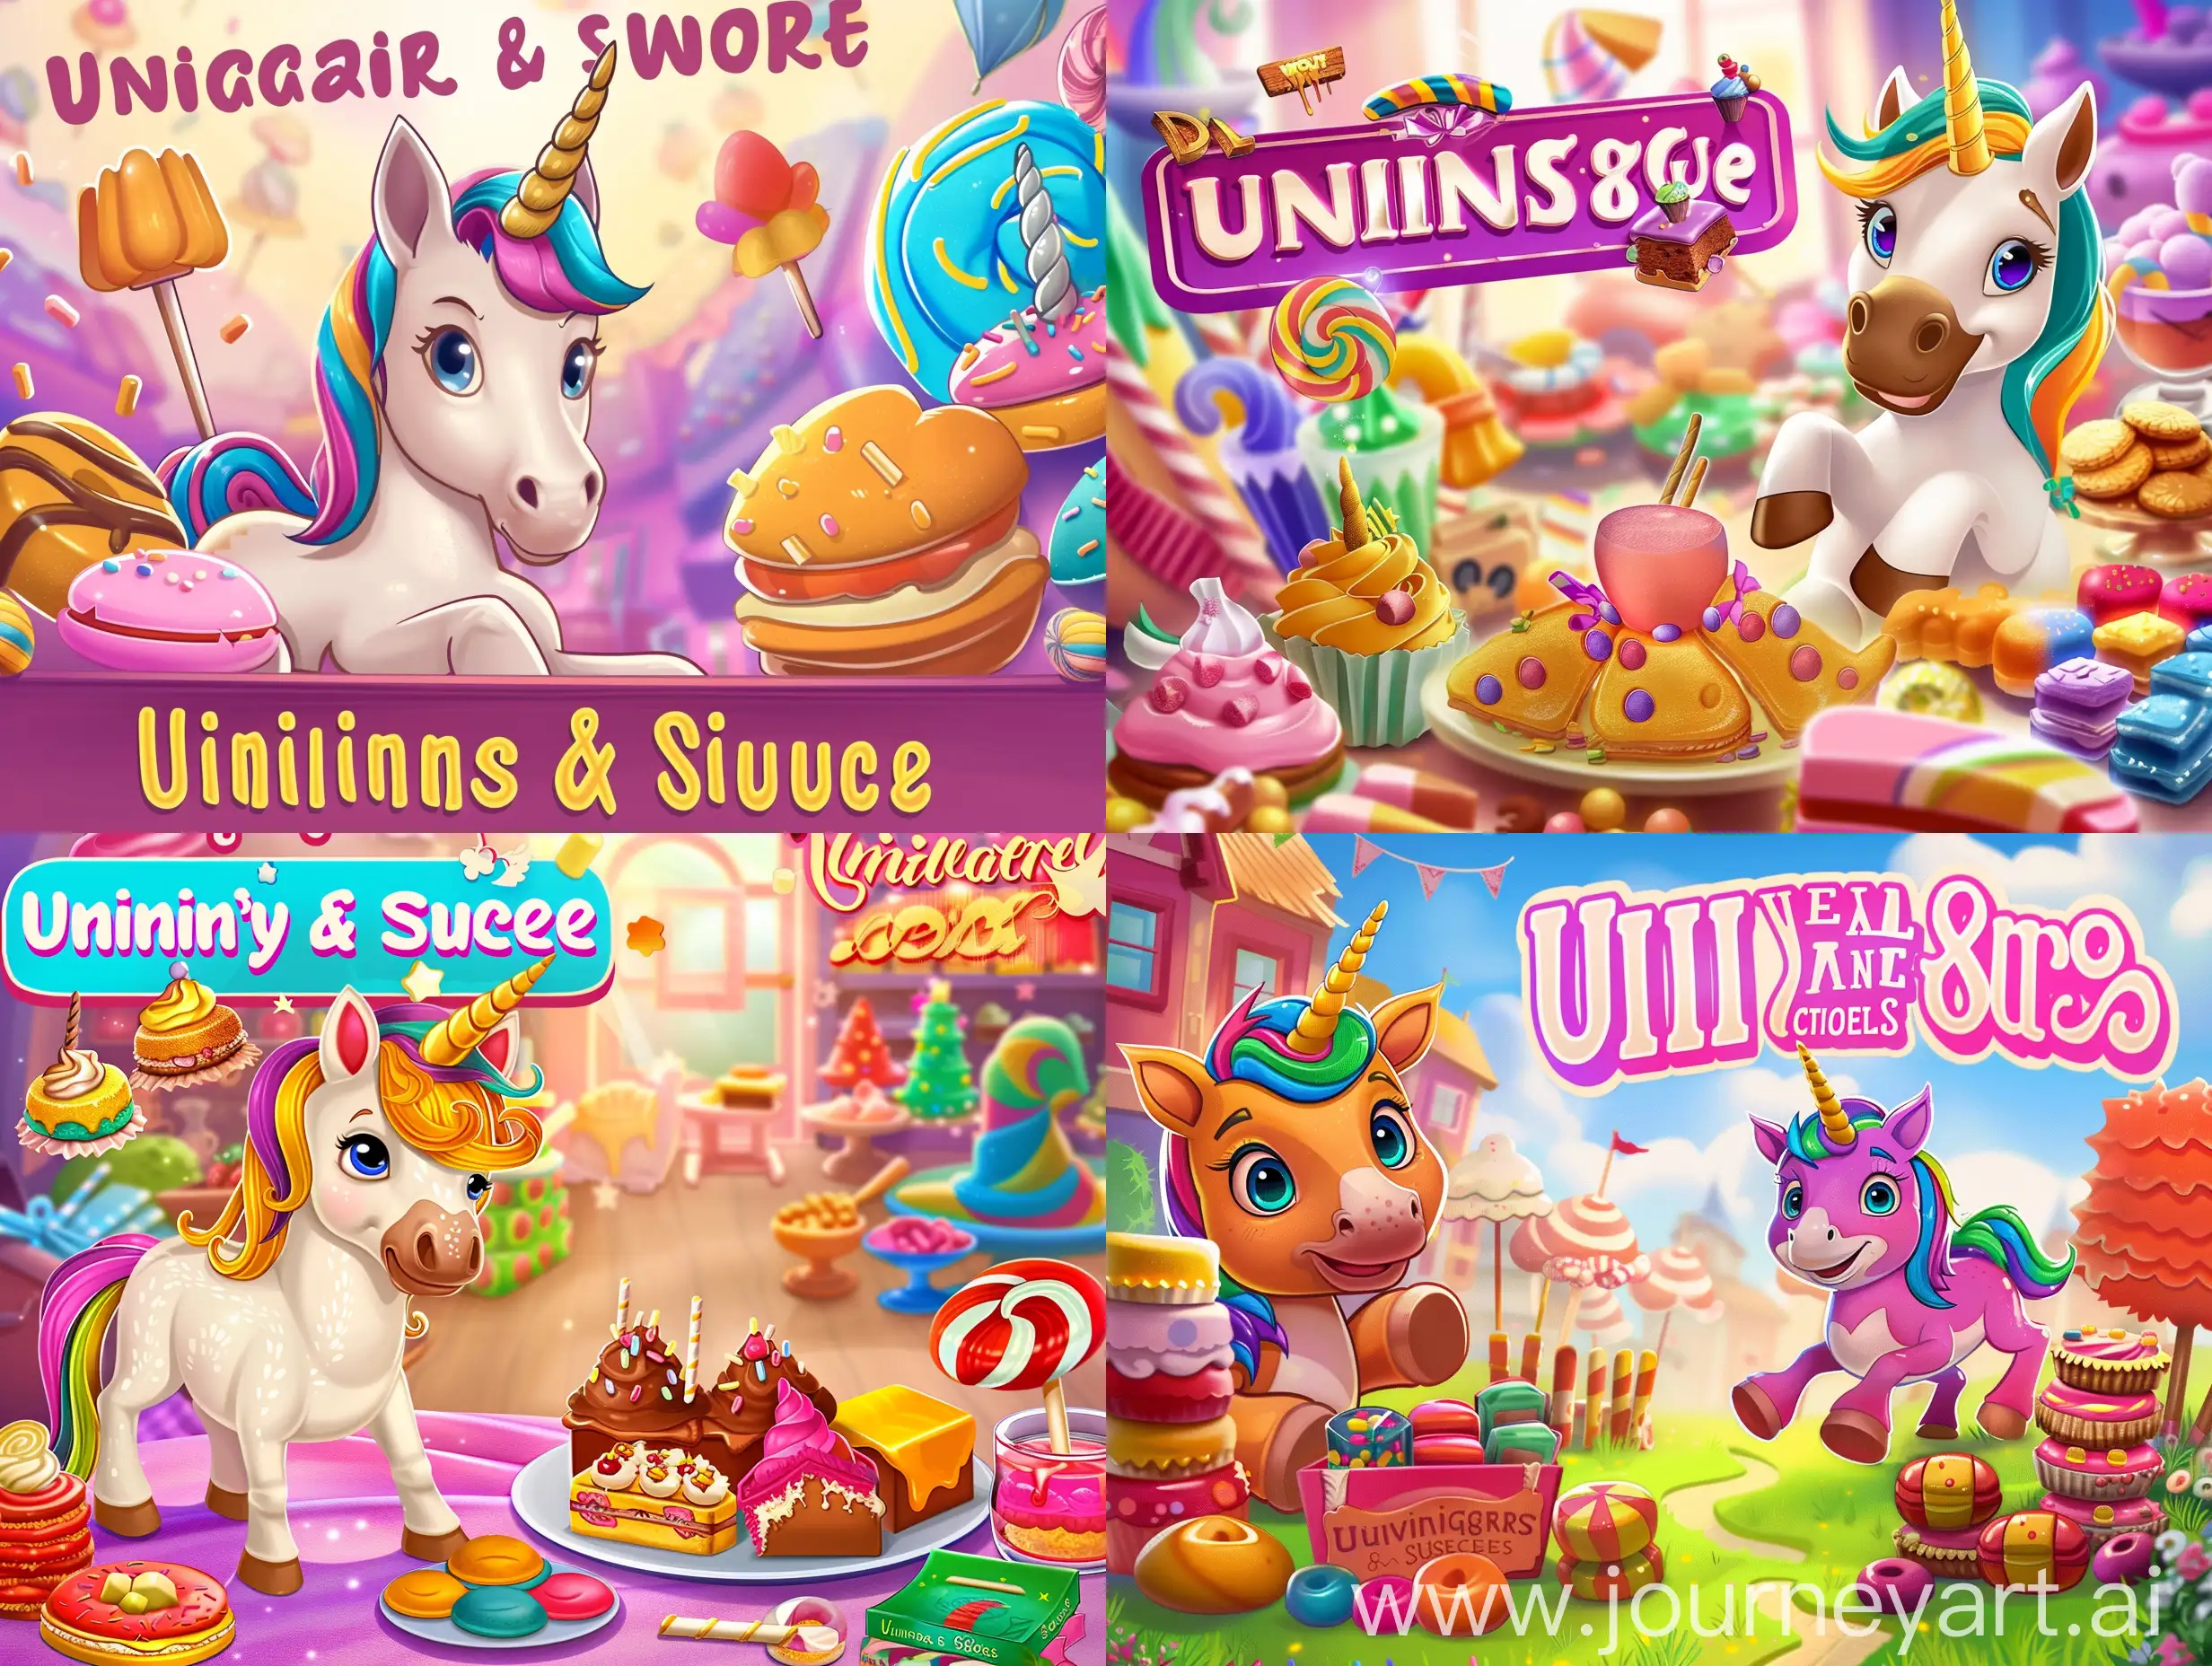 Enchanting-Adventure-in-the-World-of-Sweets-with-a-Unicorn